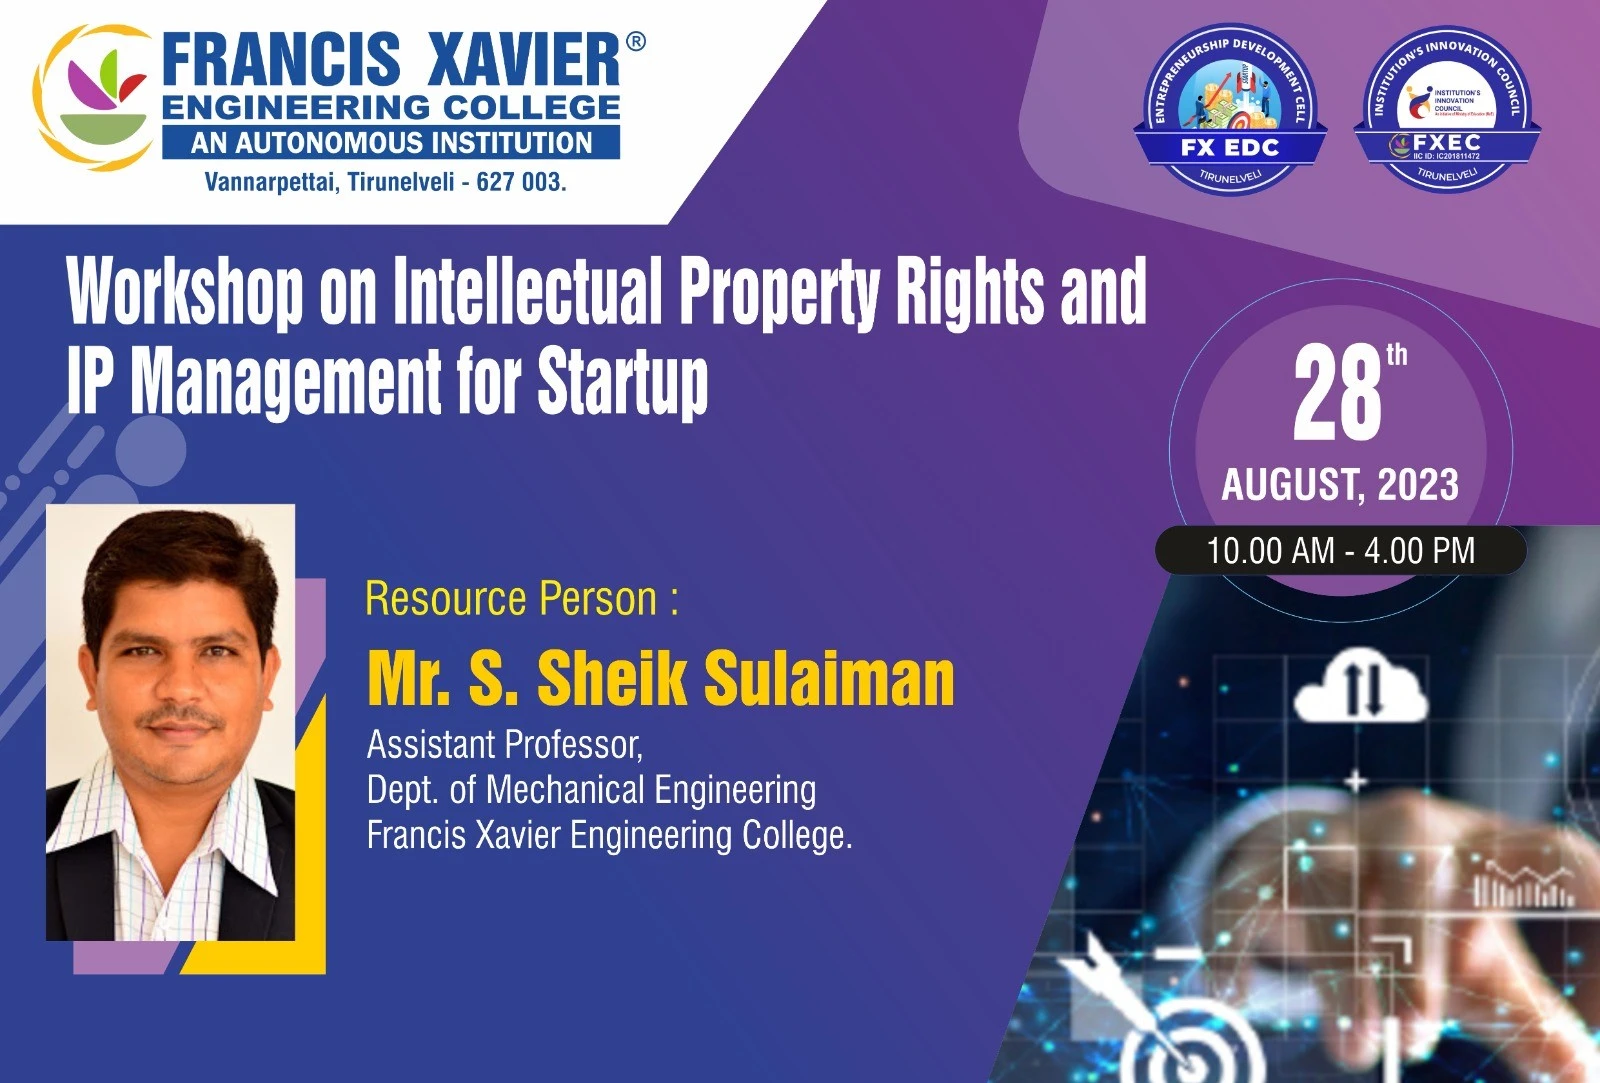 Workshop on Intellectual Property Rights and IP Management for Startup